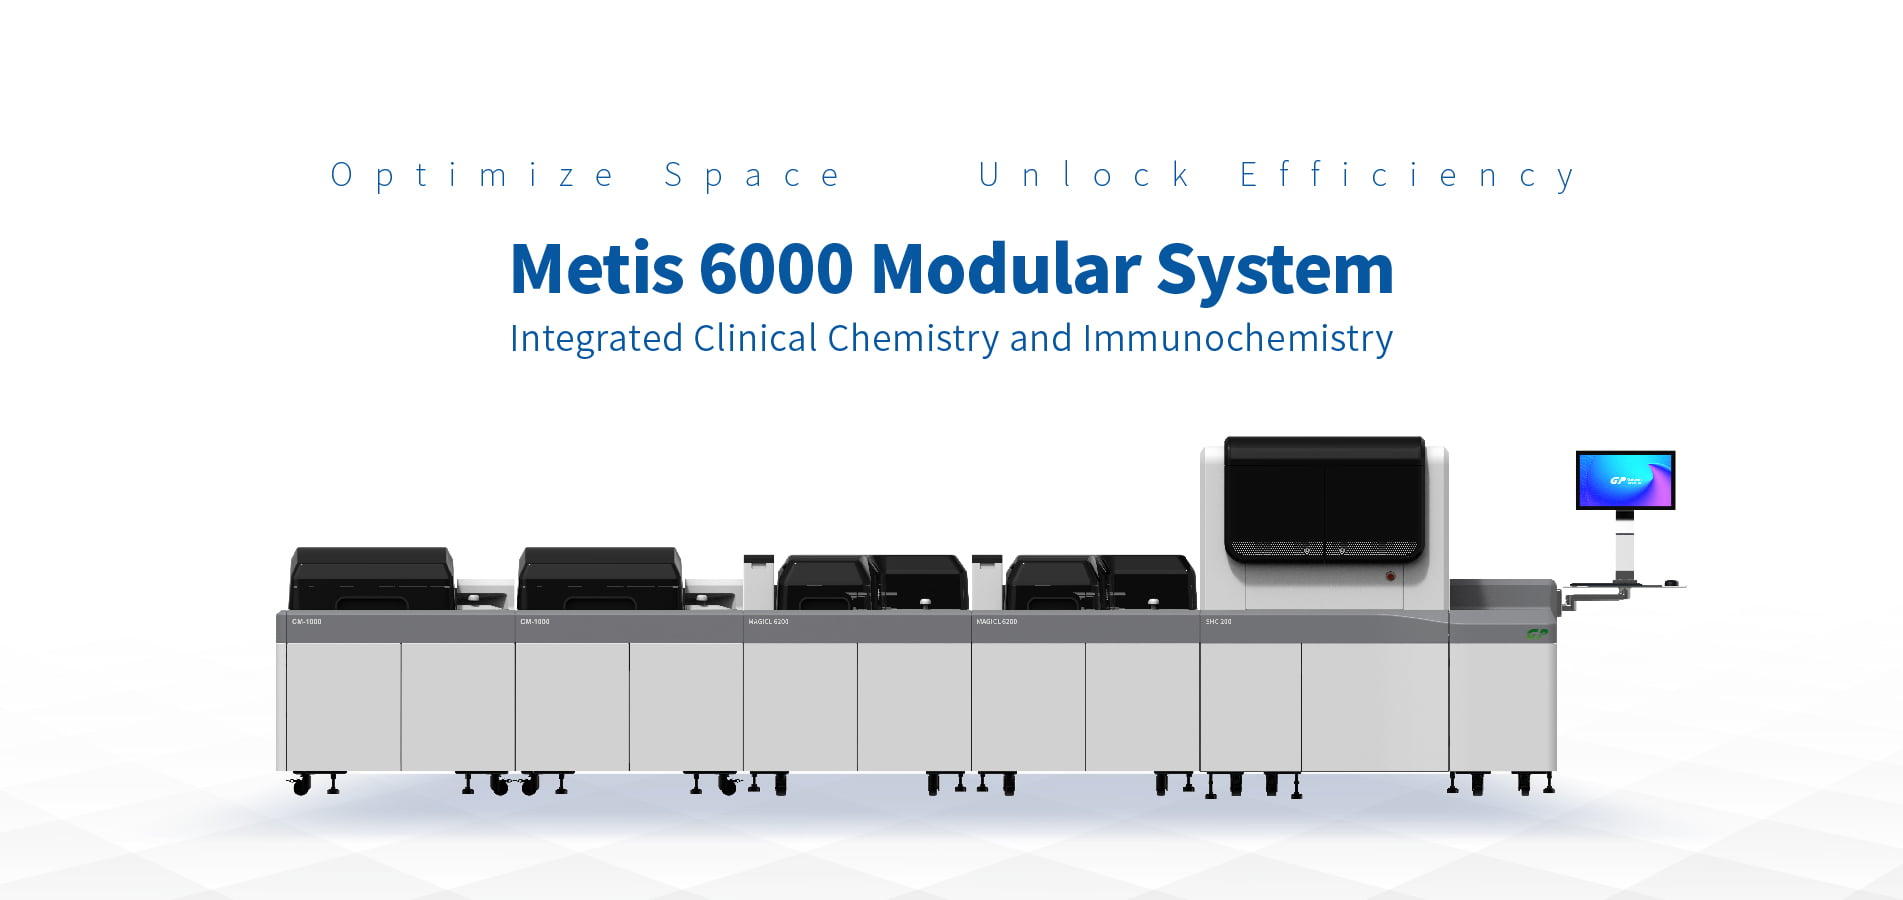 Making Modular System Accessible to More Labs - Metis 6000 Fulfills Your Needs